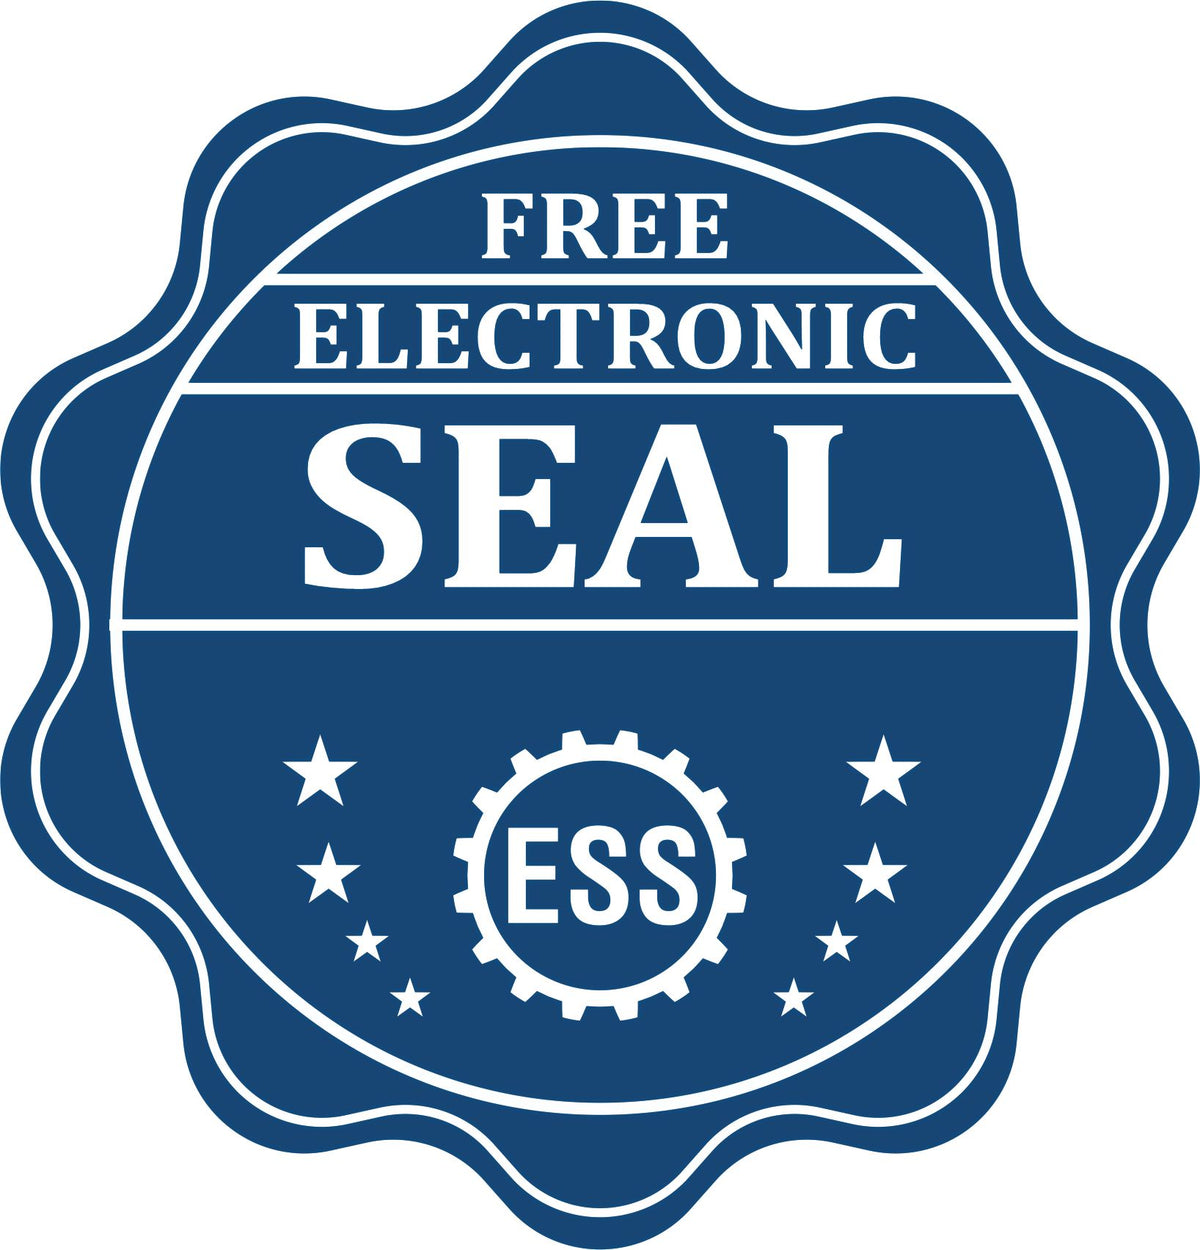 A badge showing a free electronic seal for the Long Reach Iowa Geology Seal with stars and the ESS gear on the emblem.